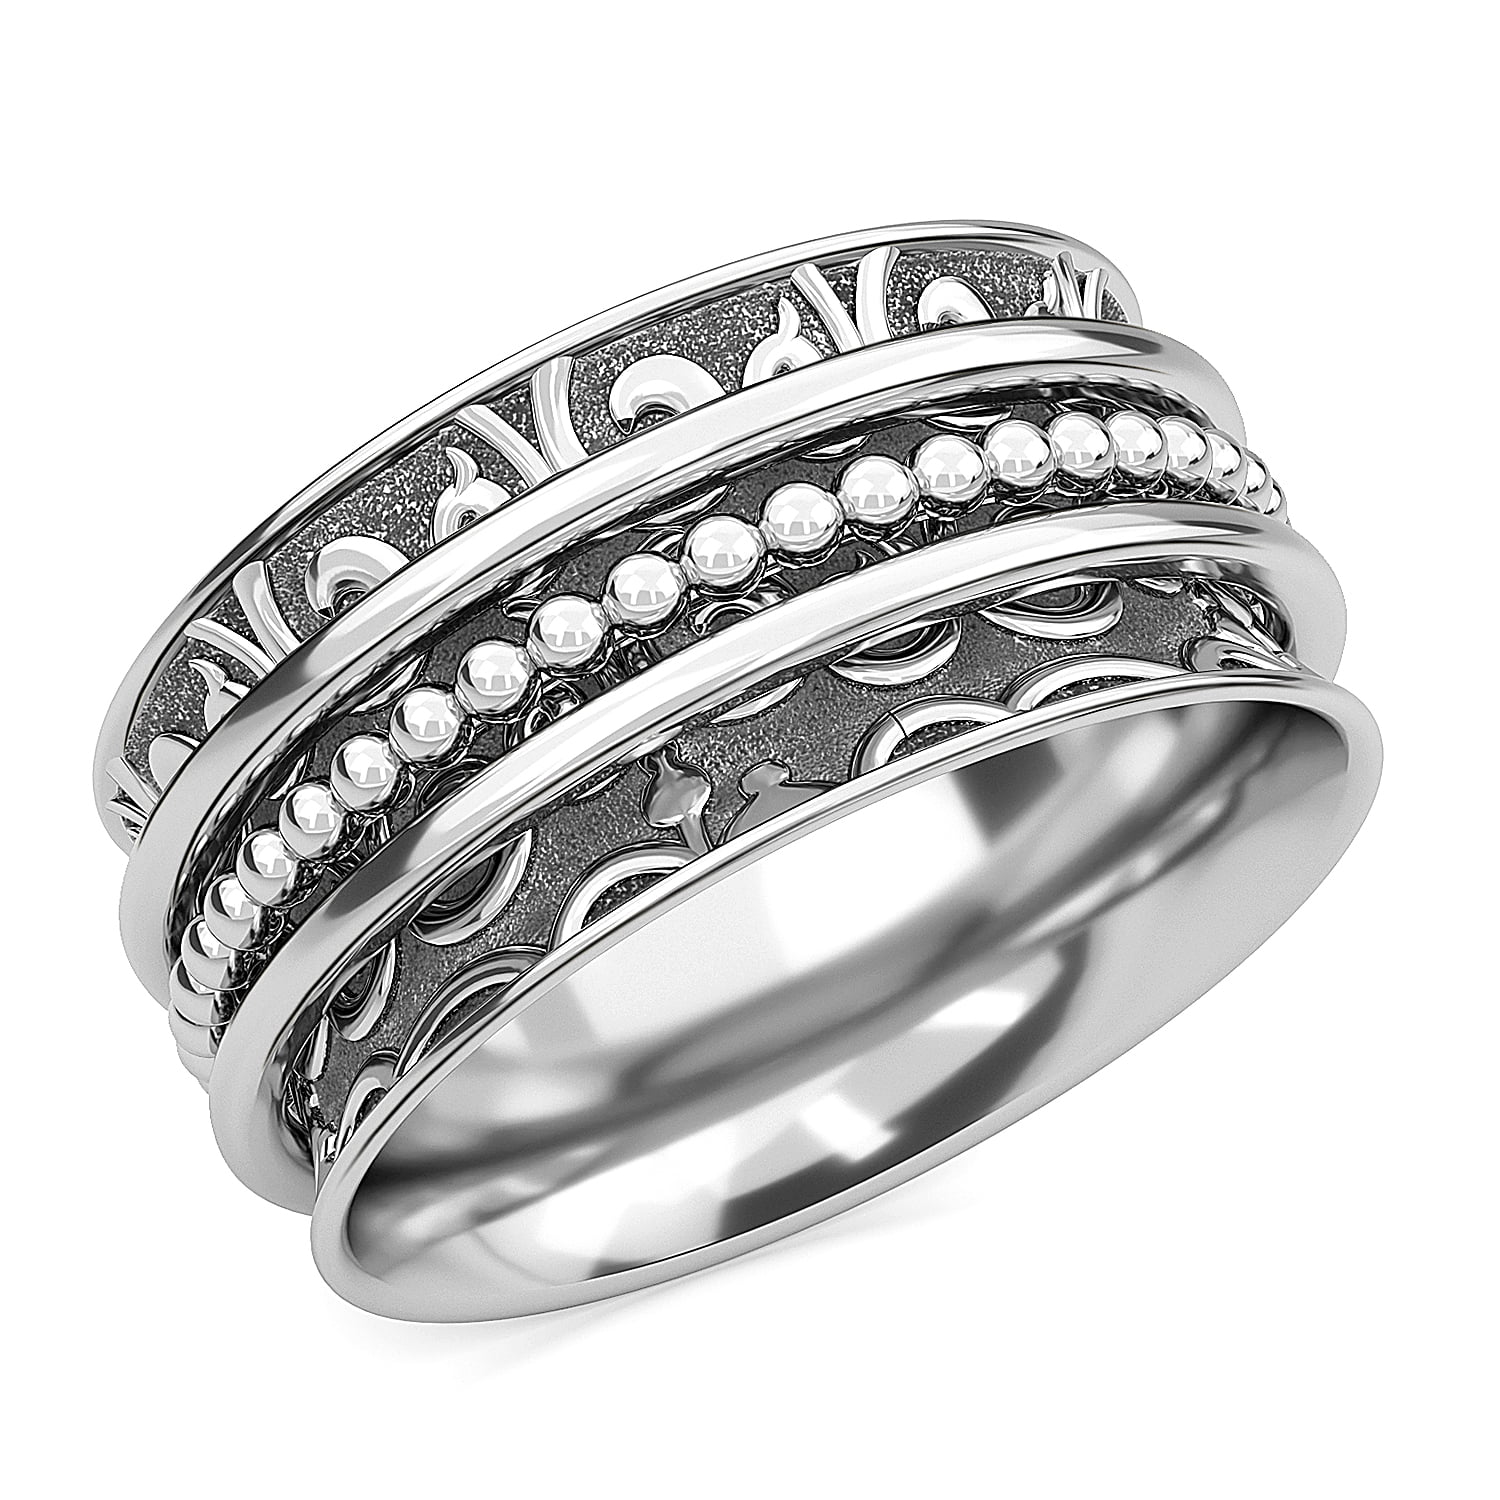 Mens Womens Spinner Band Ring 925 Sterling Silver Artisan Crafted Statement Boho Handmade Fashion Moon and Star Cross Vintage Spinner Band Ring